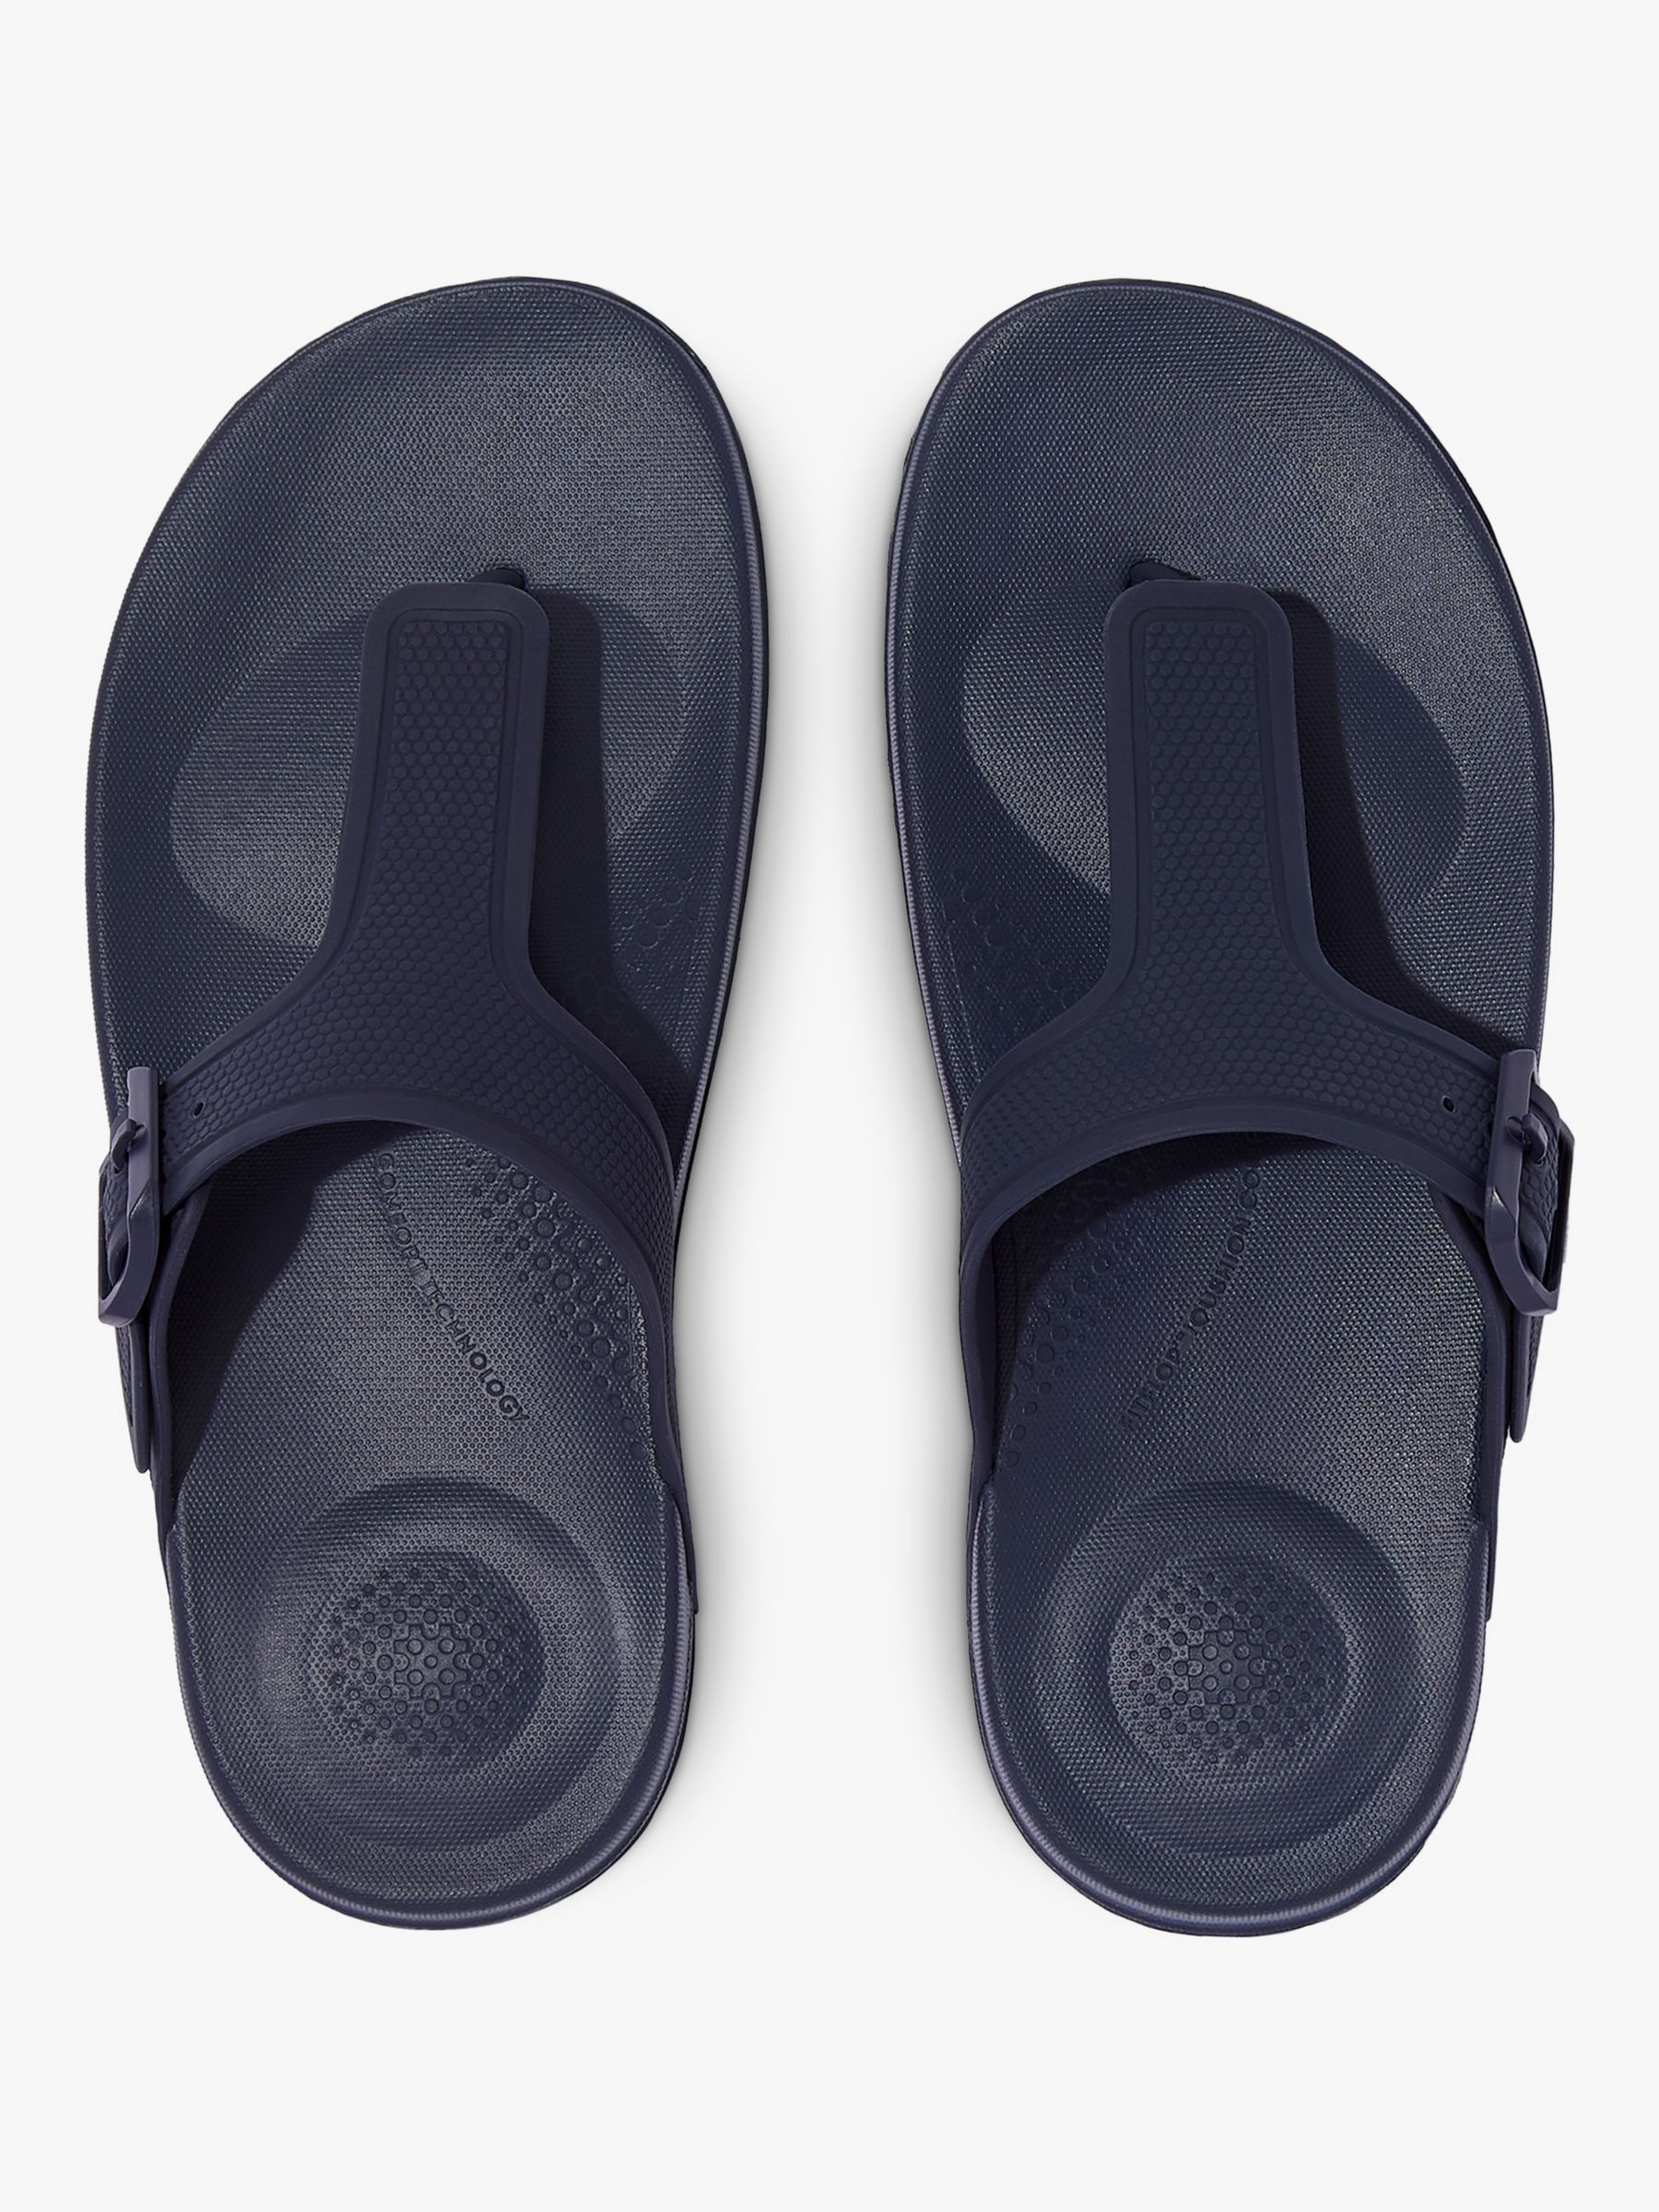 FitFlop Buckle Flip Flops, Midnight Navy at John Lewis & Partners